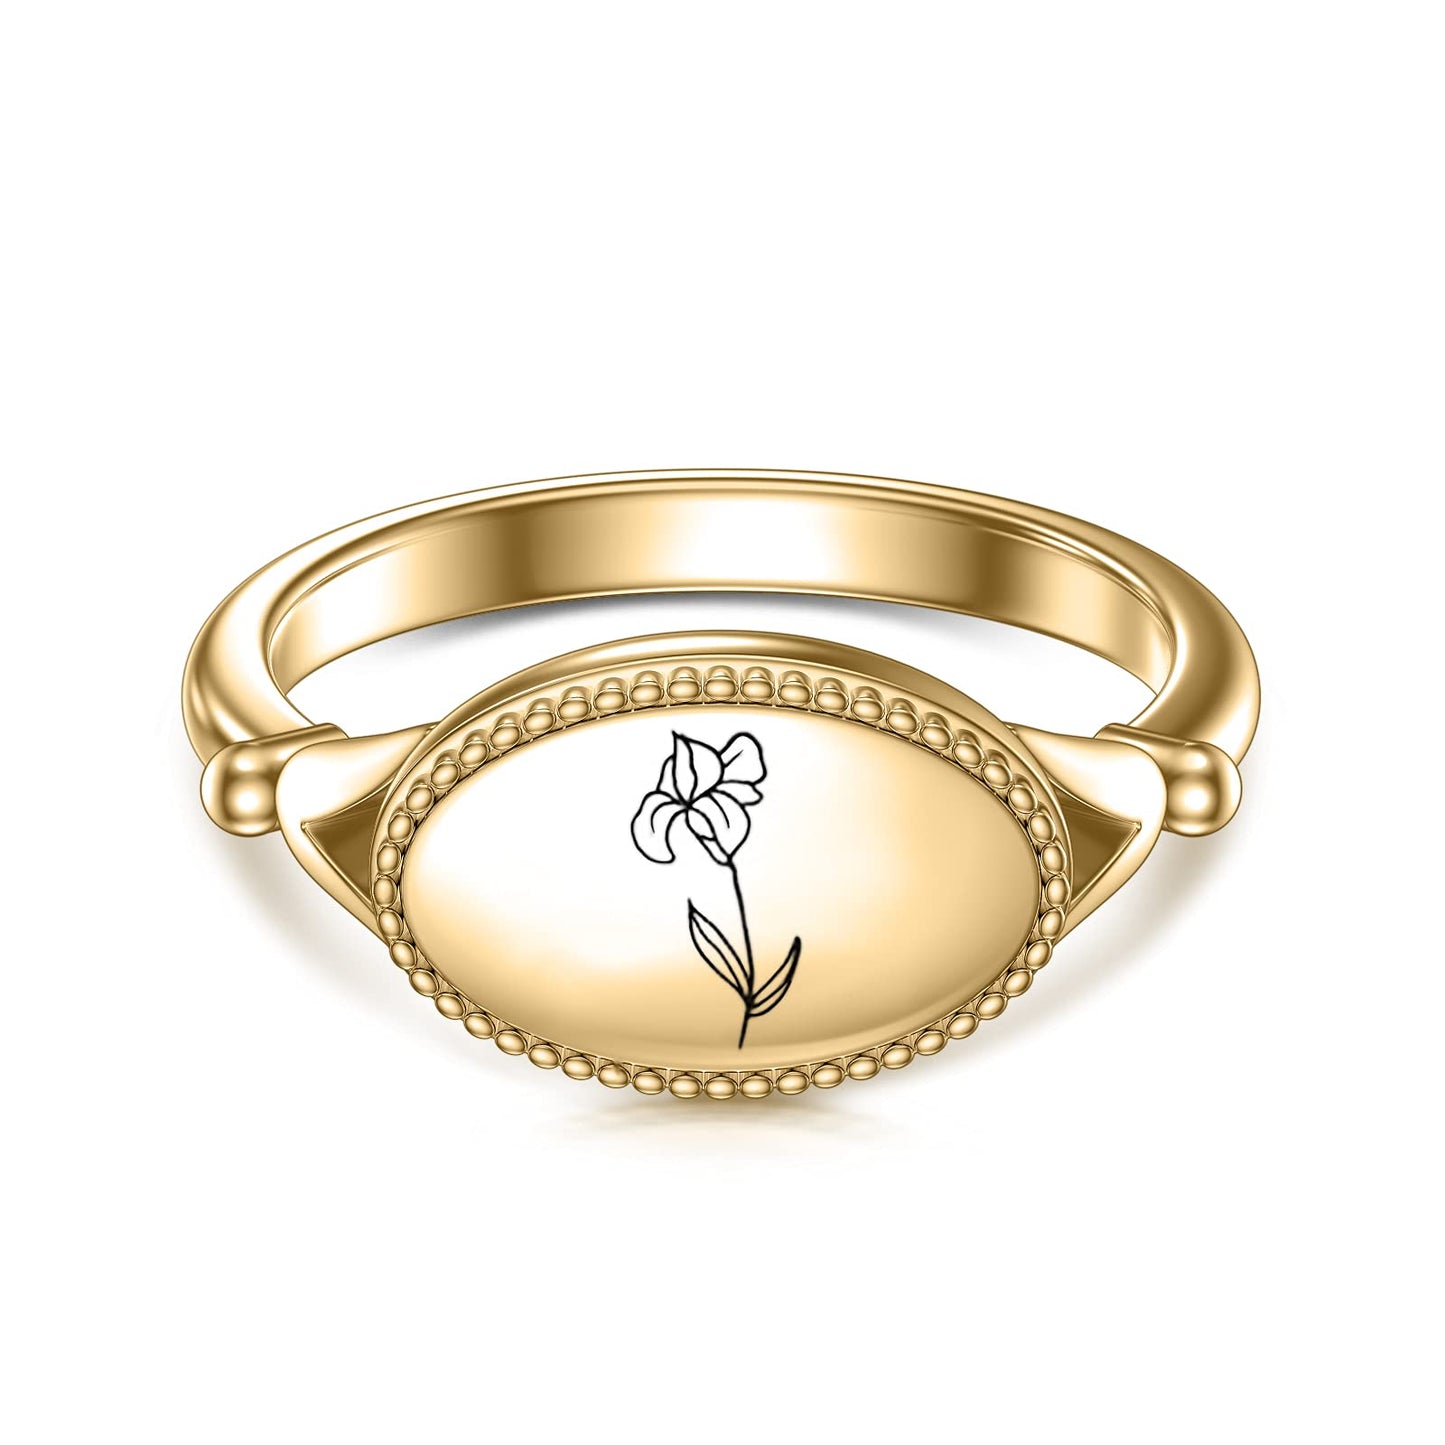 Family Birth Flower Month Ring Personalized Gift For Her